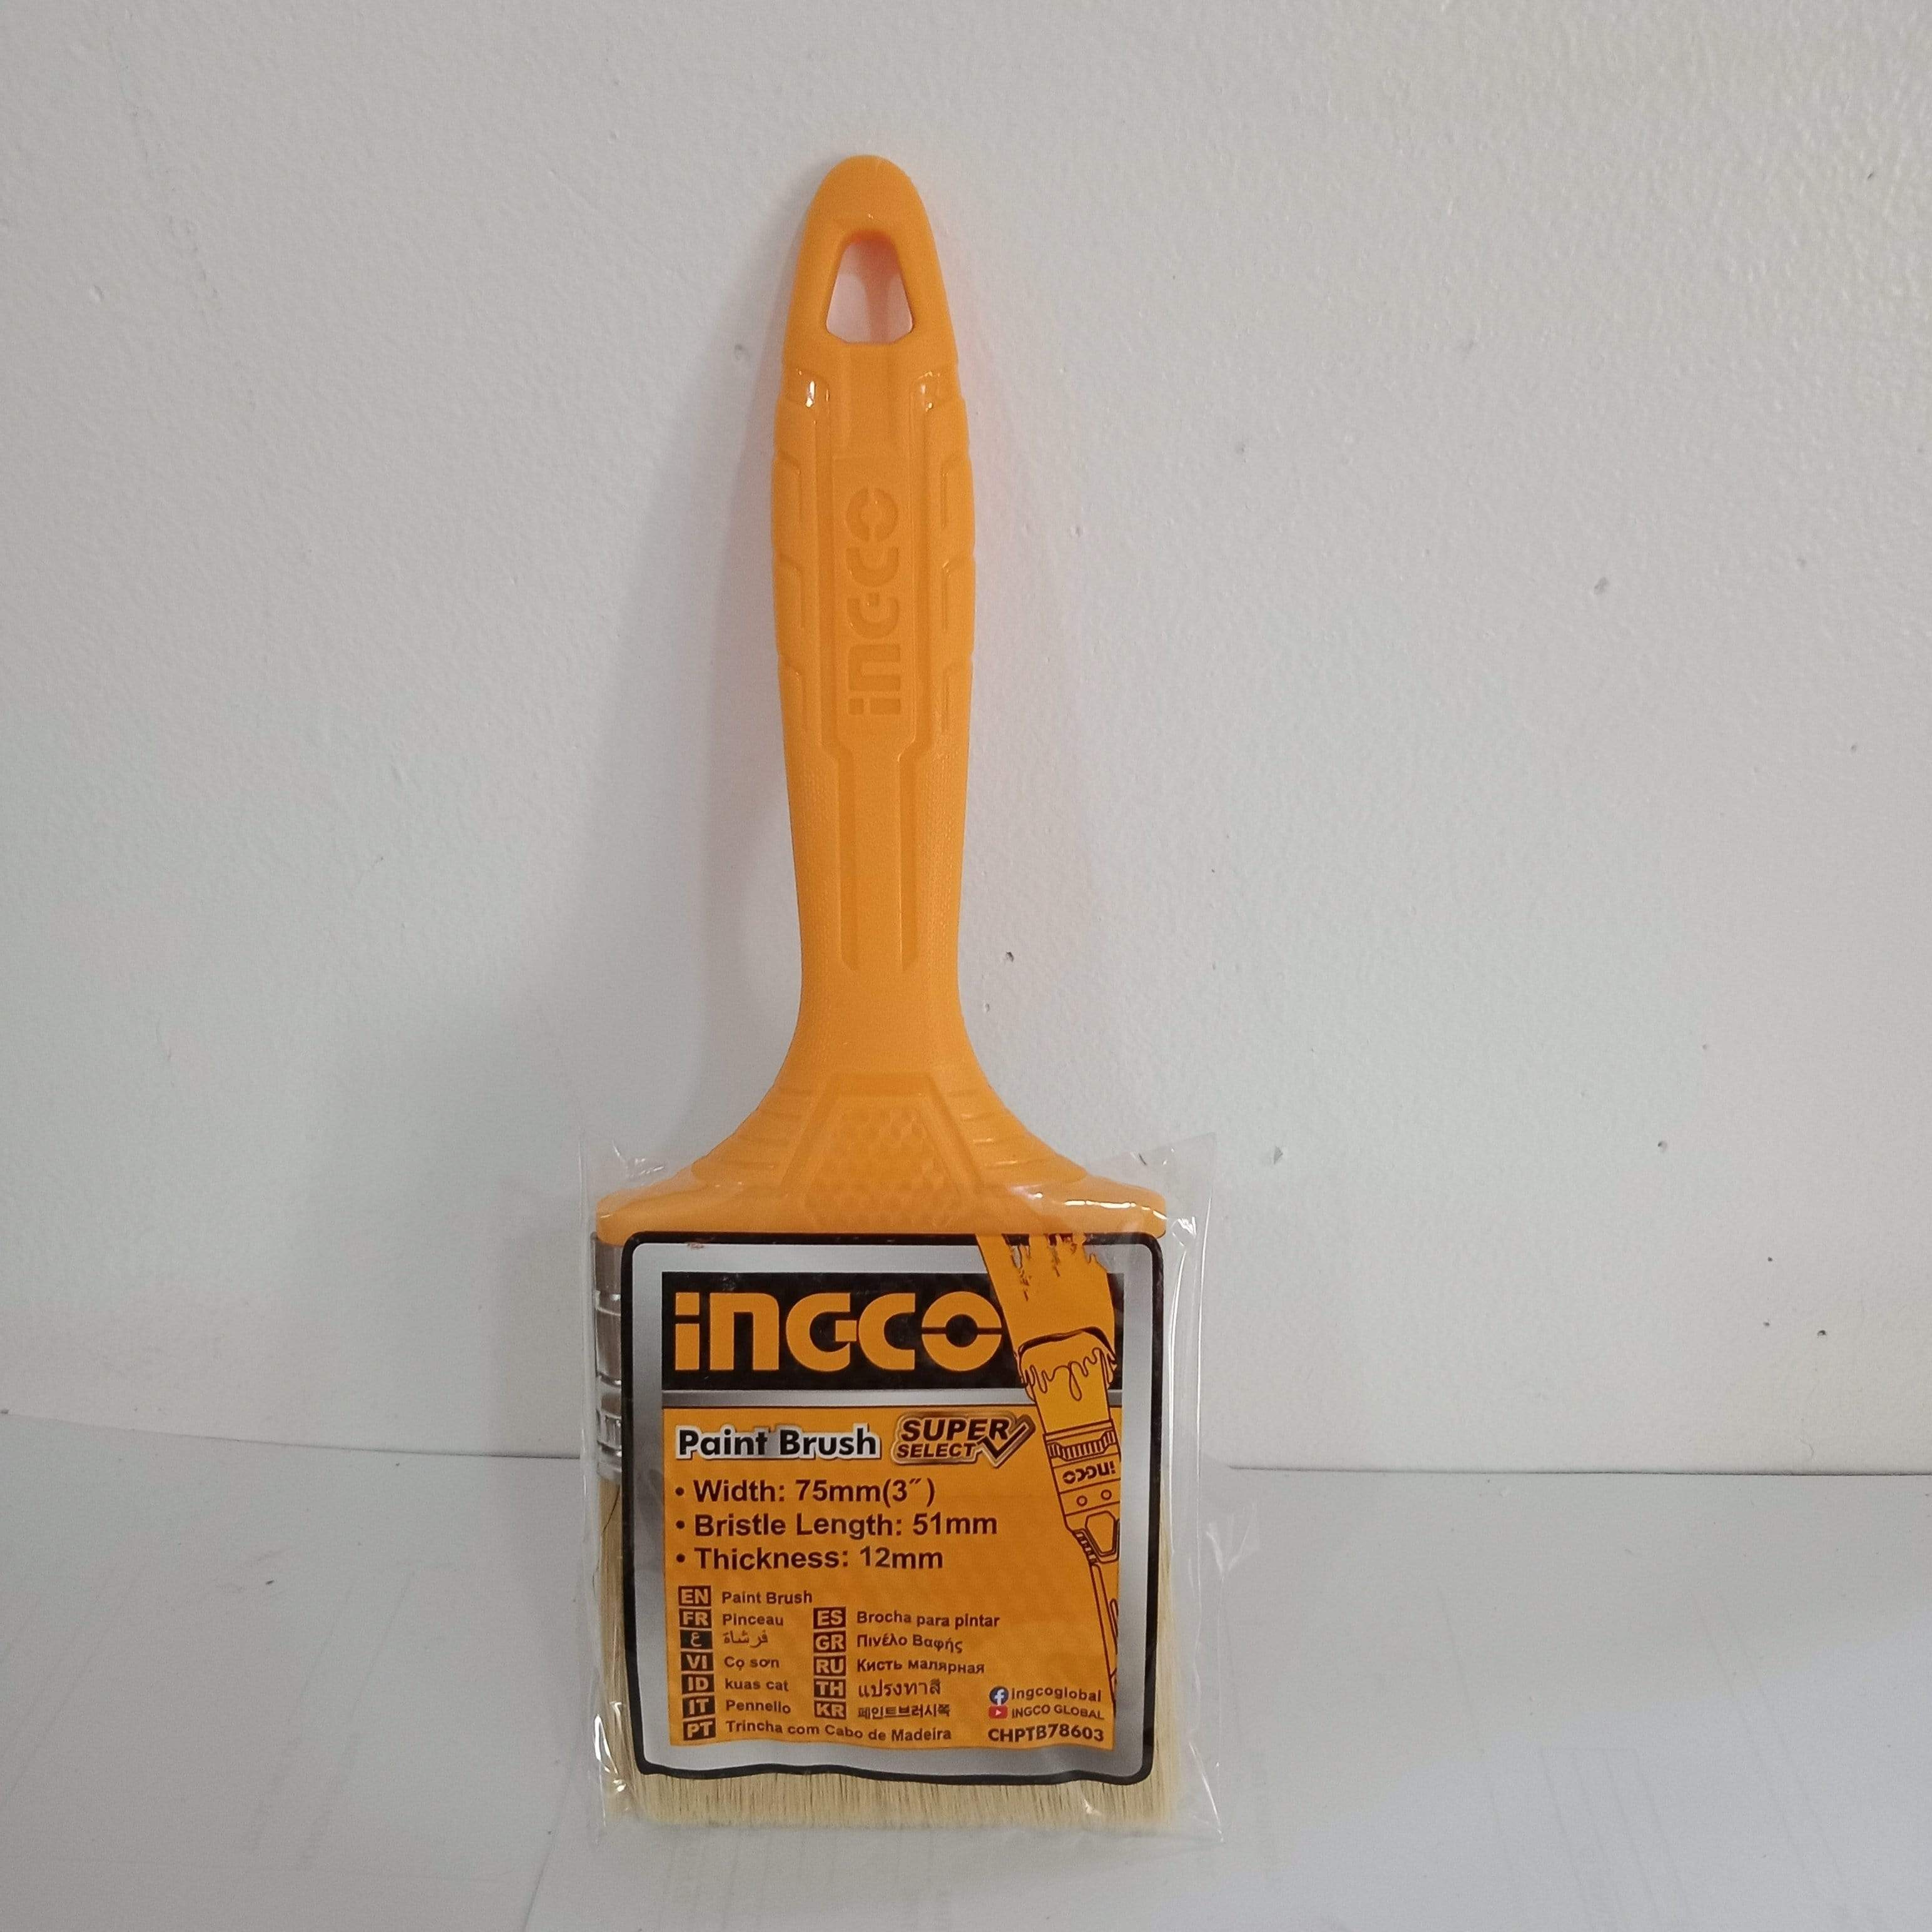 Ingco Paint Brush for Oil Based Paint with Plastic Handle - 1", 2", 3" & 4" | Supply Master | Accra, Ghana Building Material Building Steel Engineering Hardware tool